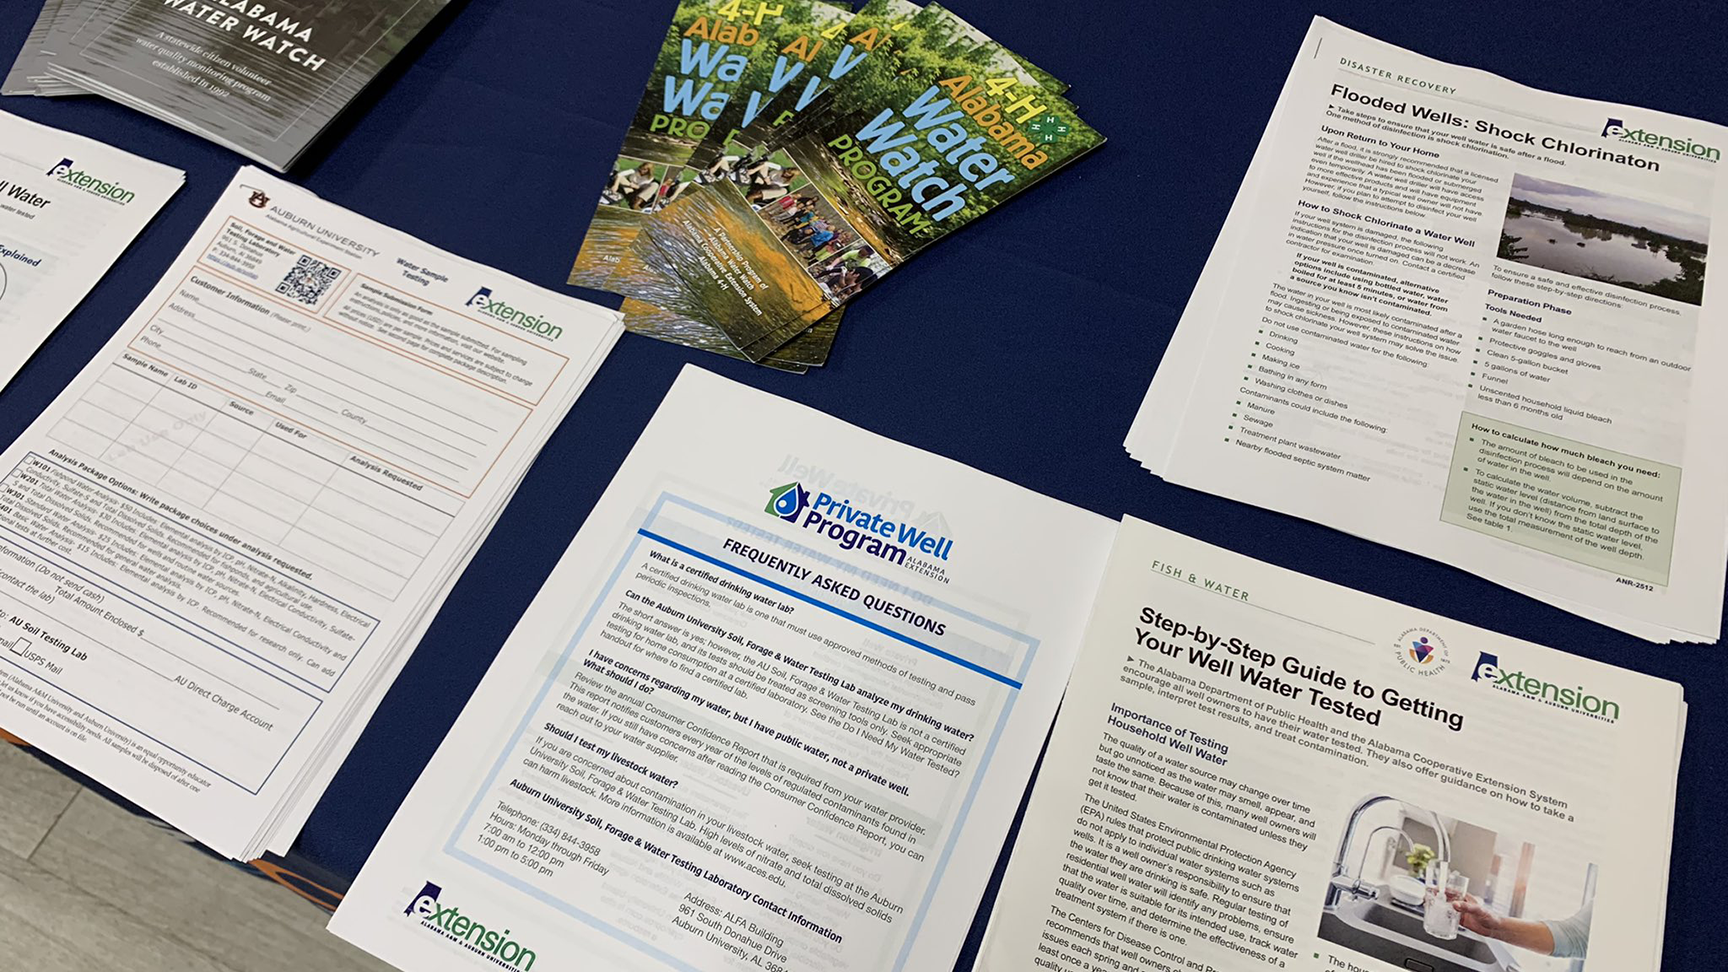 APWP Materials available to Tallapoosa County Well Water Workshop attendees.